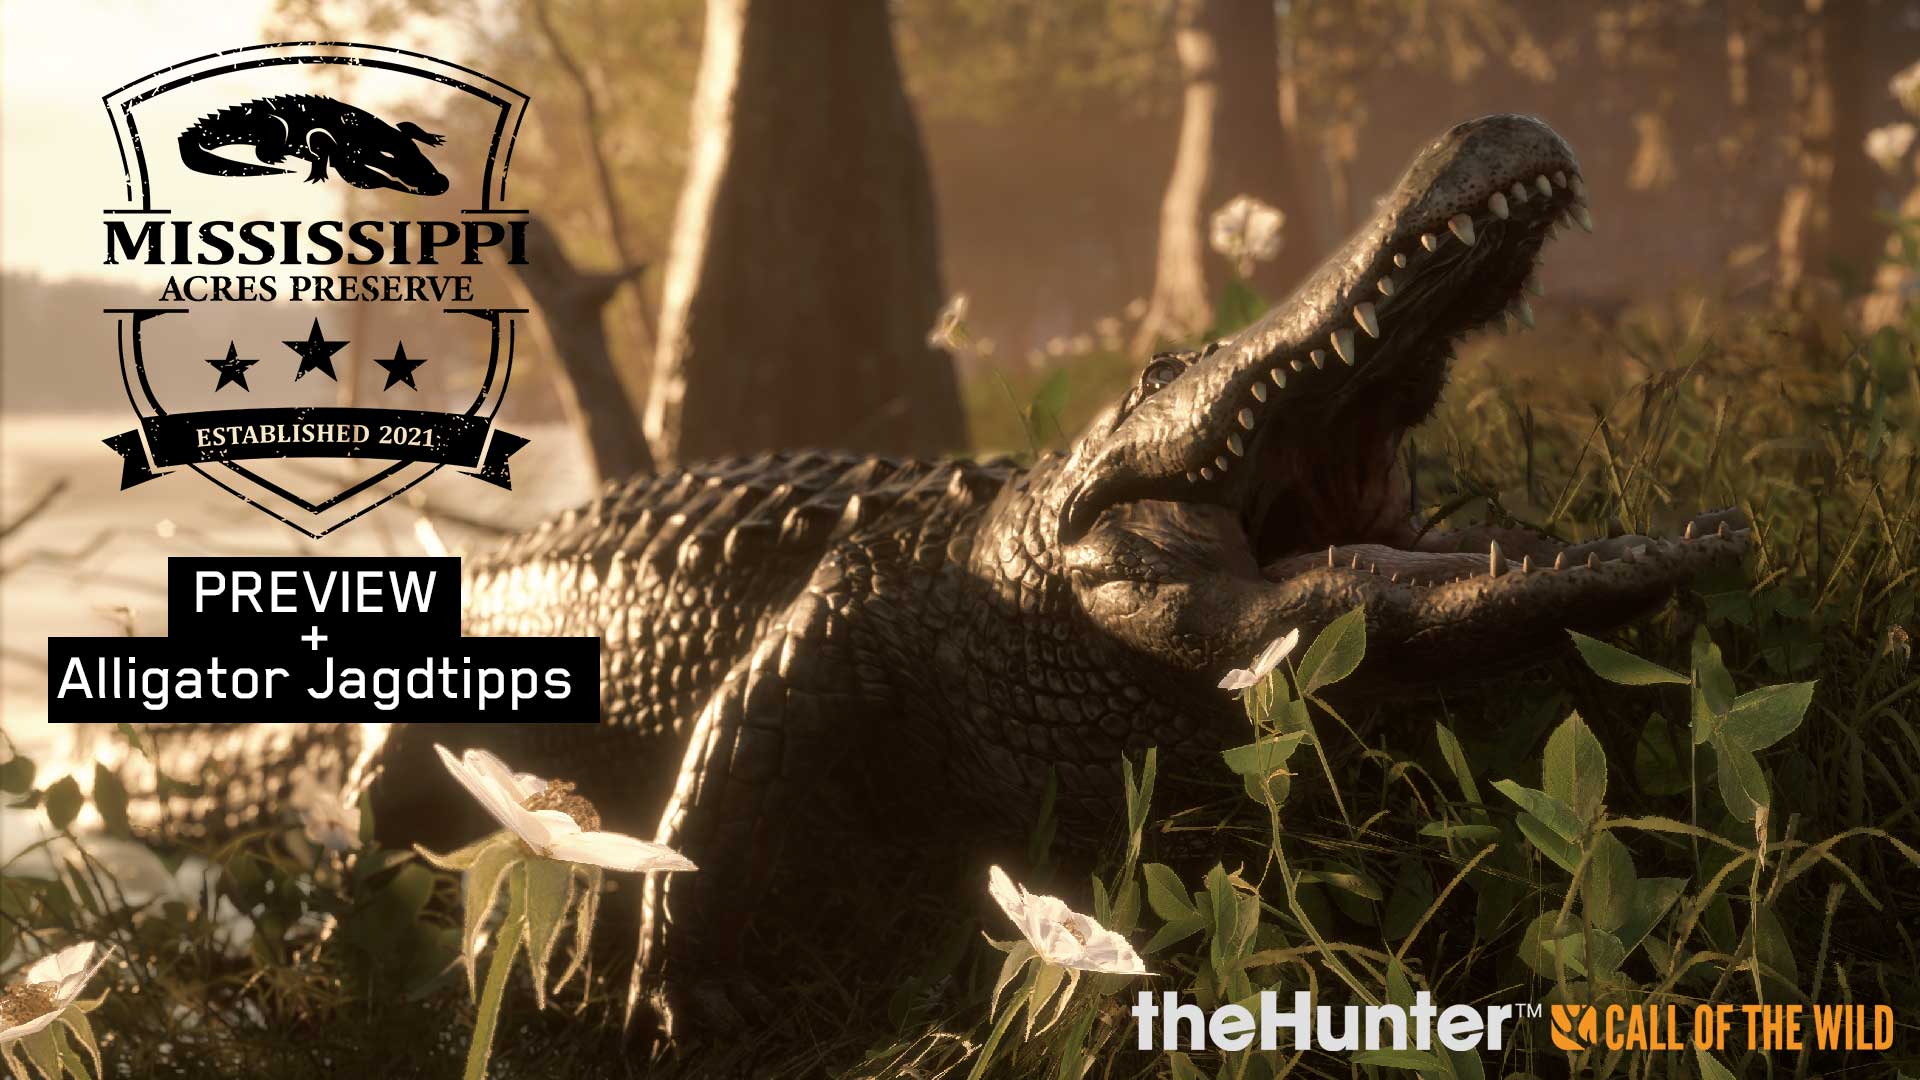 thehunter cotw mississippi reservat preview